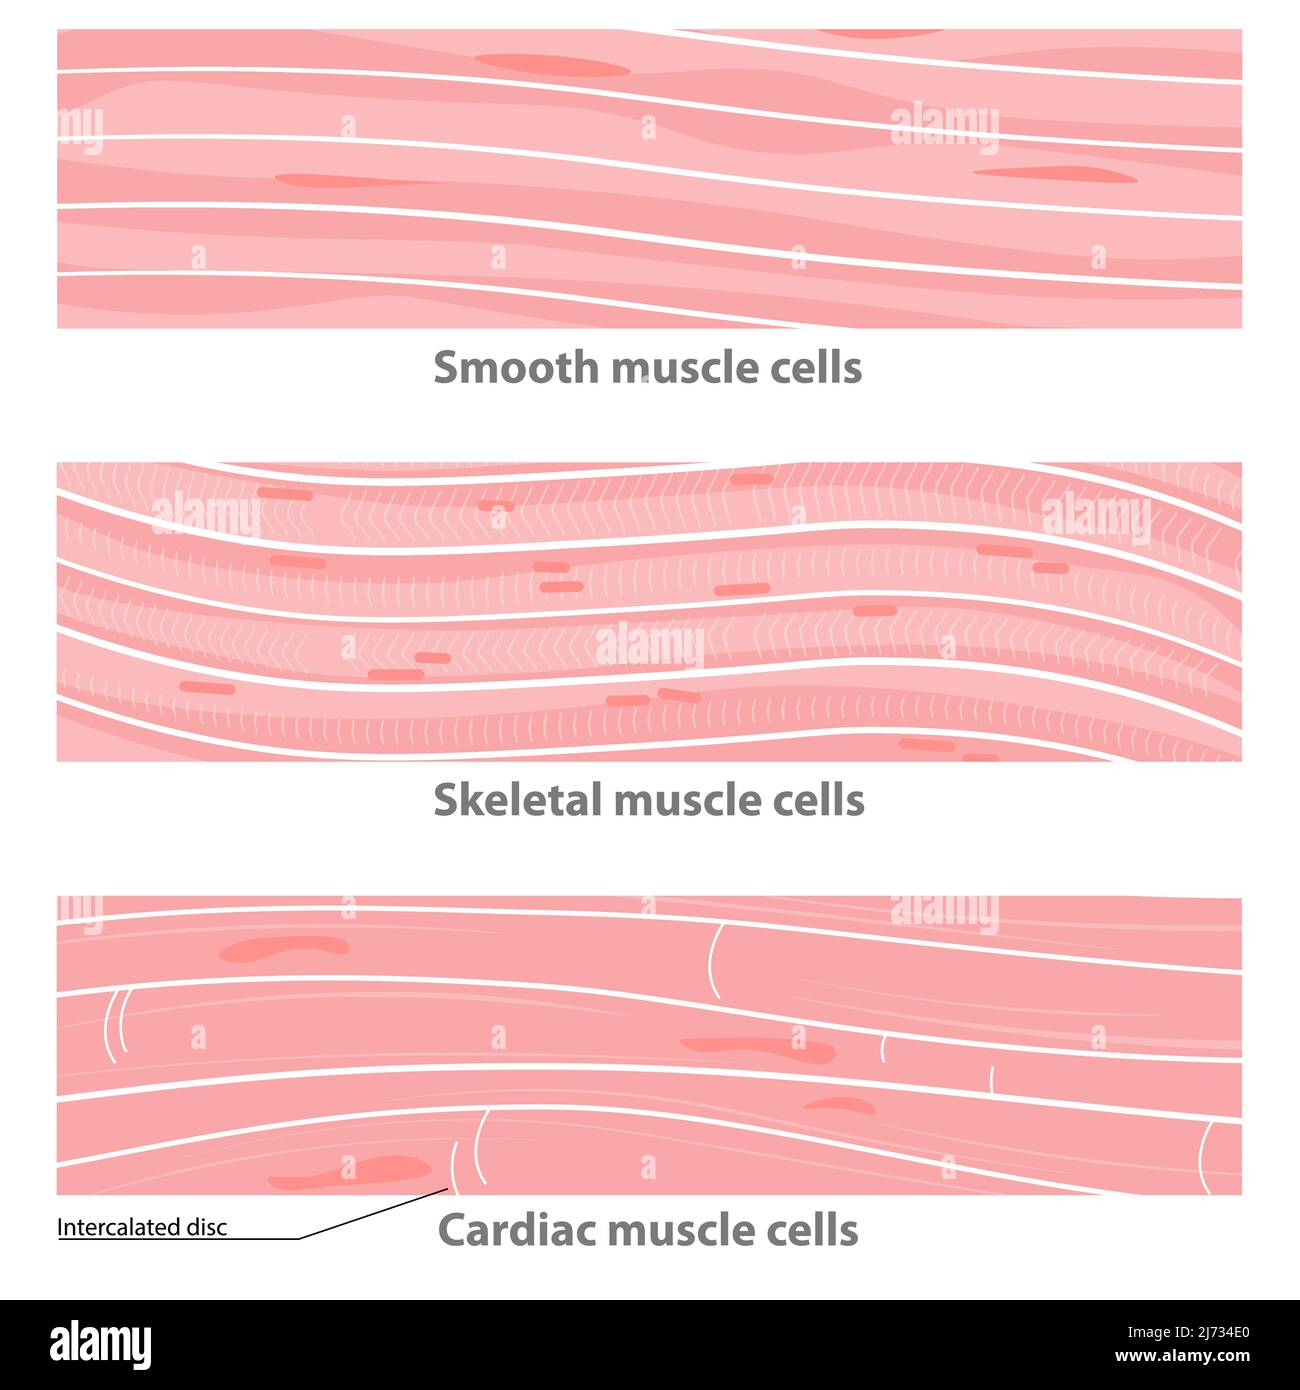 Types of muscle tissue structure: cardiac, smooth, sceletal. smooth muscle cells, cardiac muscle cells,  multinucleate skeletal cells. Stock Vector